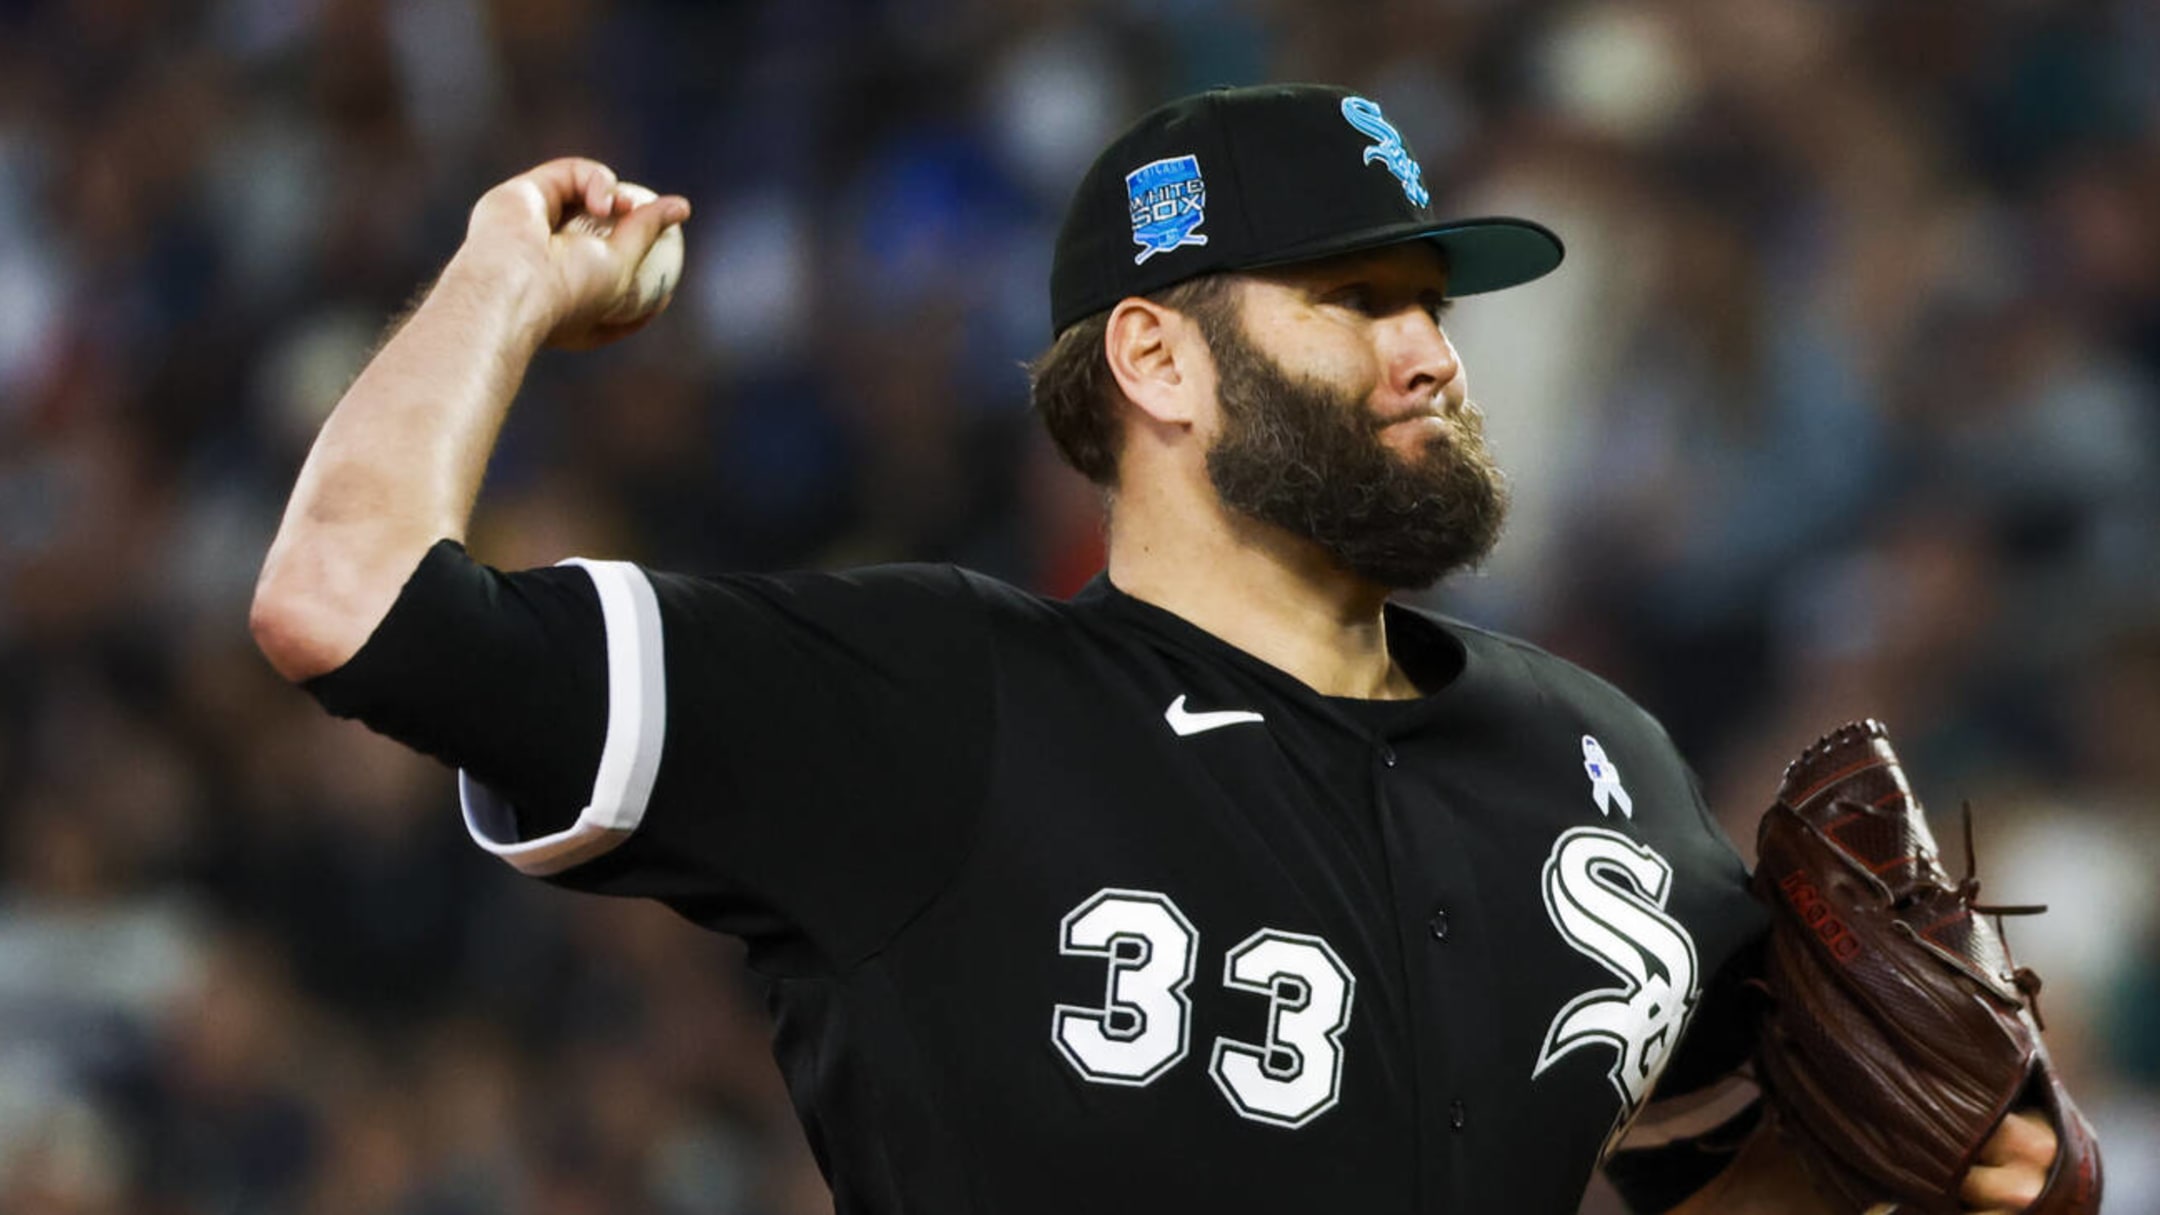 BREAKING TRADE: Chicago White Sox pitchers Lance Lynn and Joe